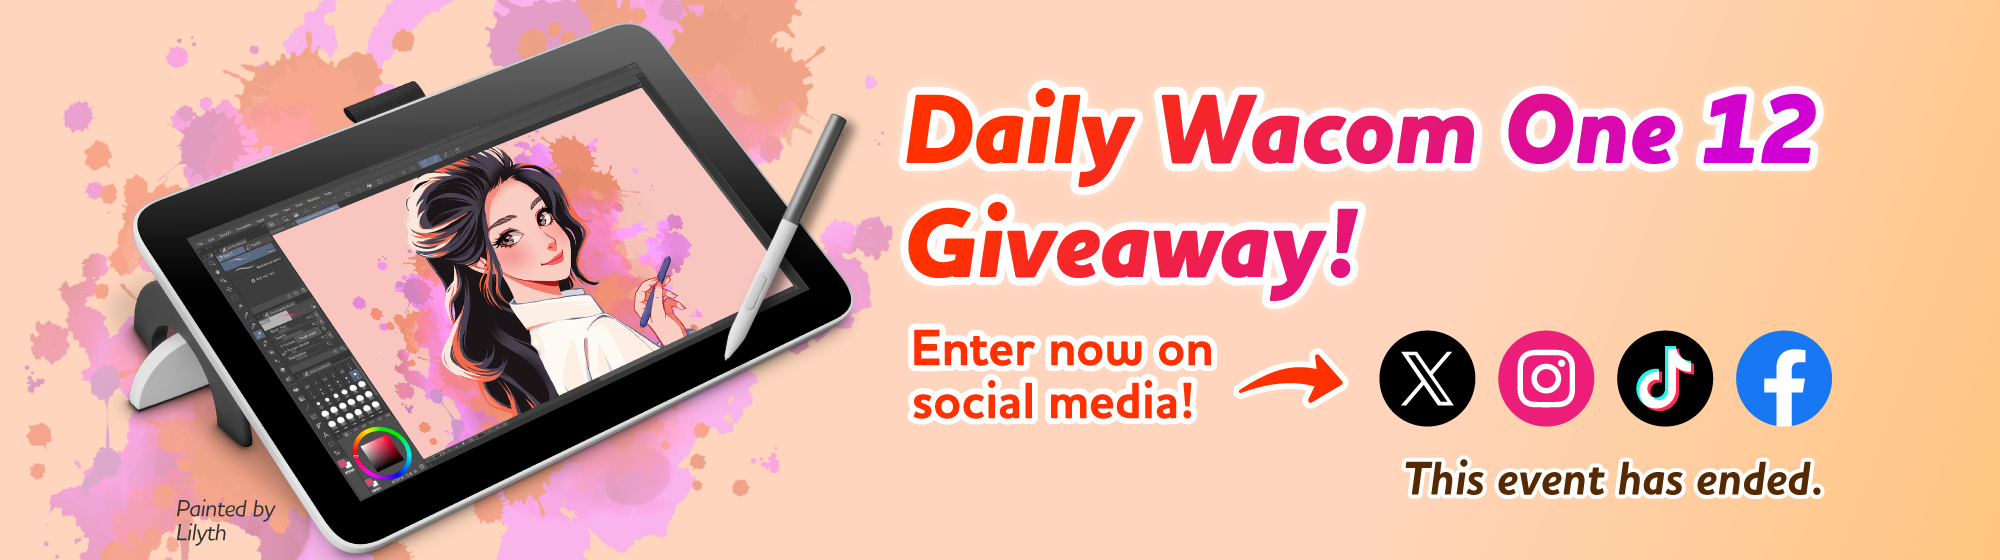 Daily Wacom One 12 Giveaway! Enter now on social media!